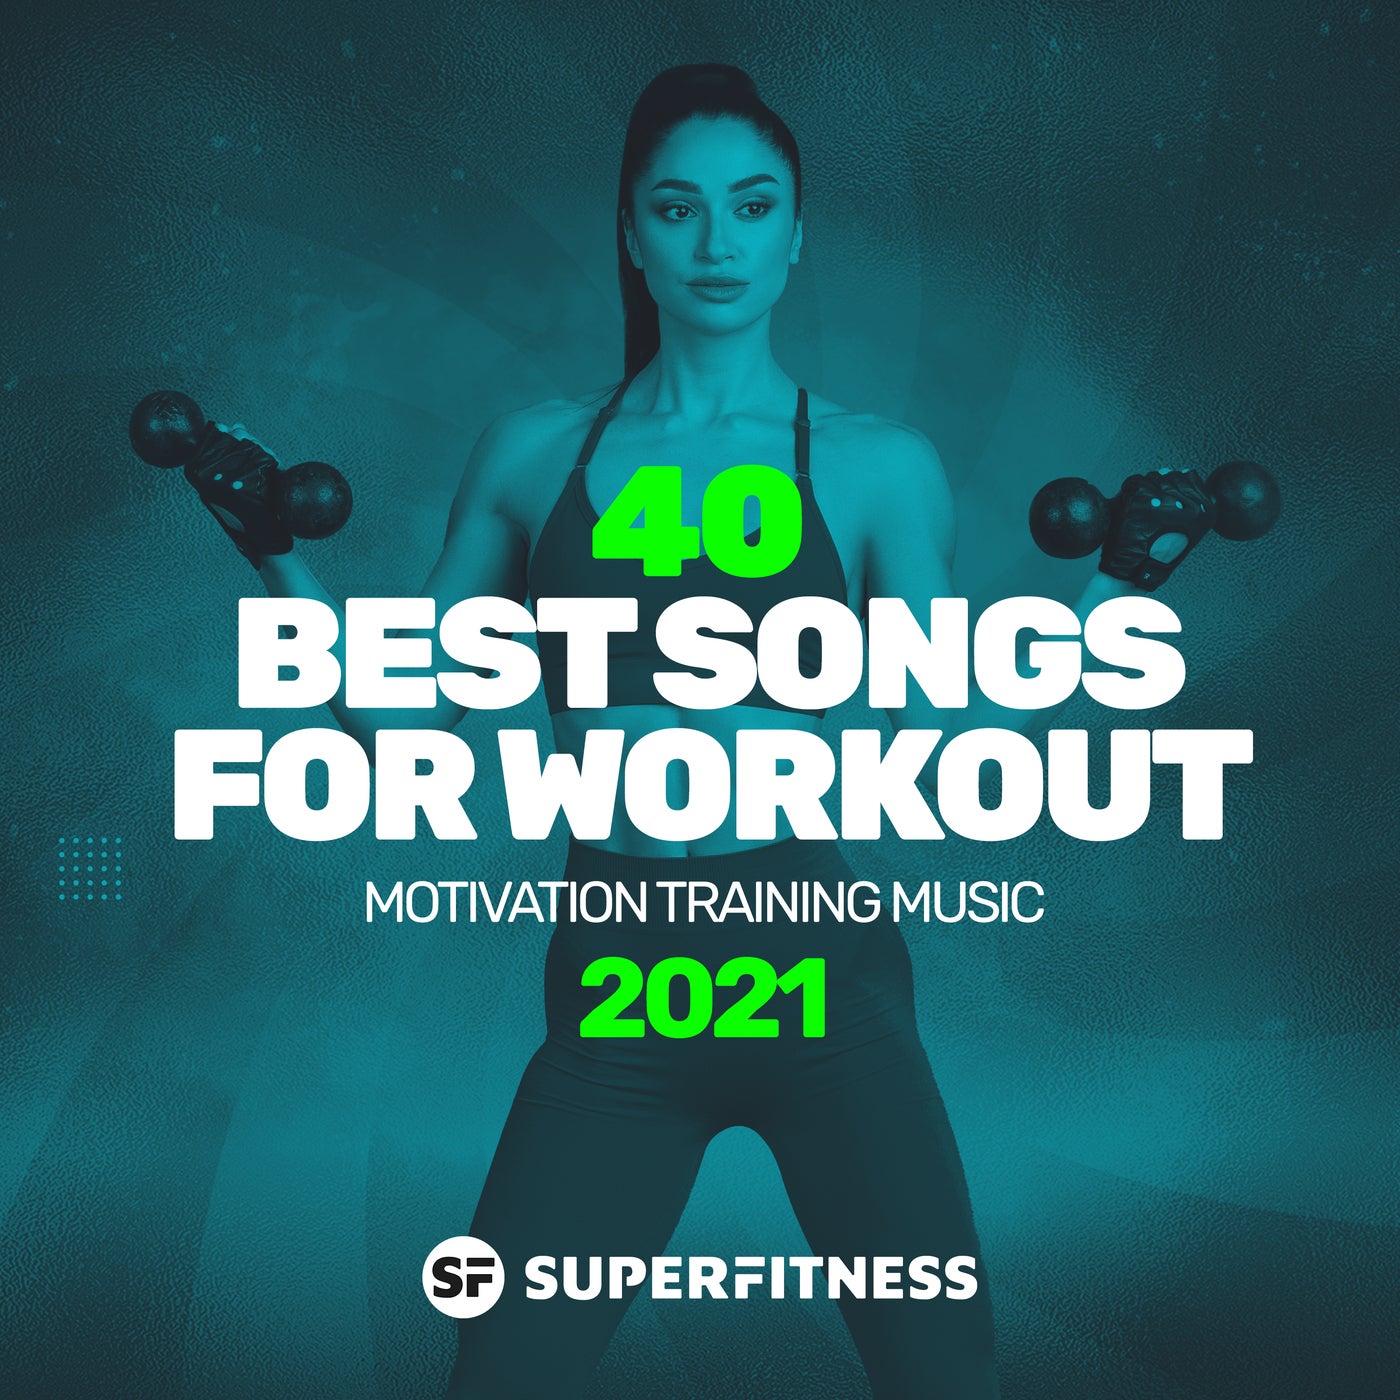 40 Best Songs For Workout 2021: Motivation Training Music